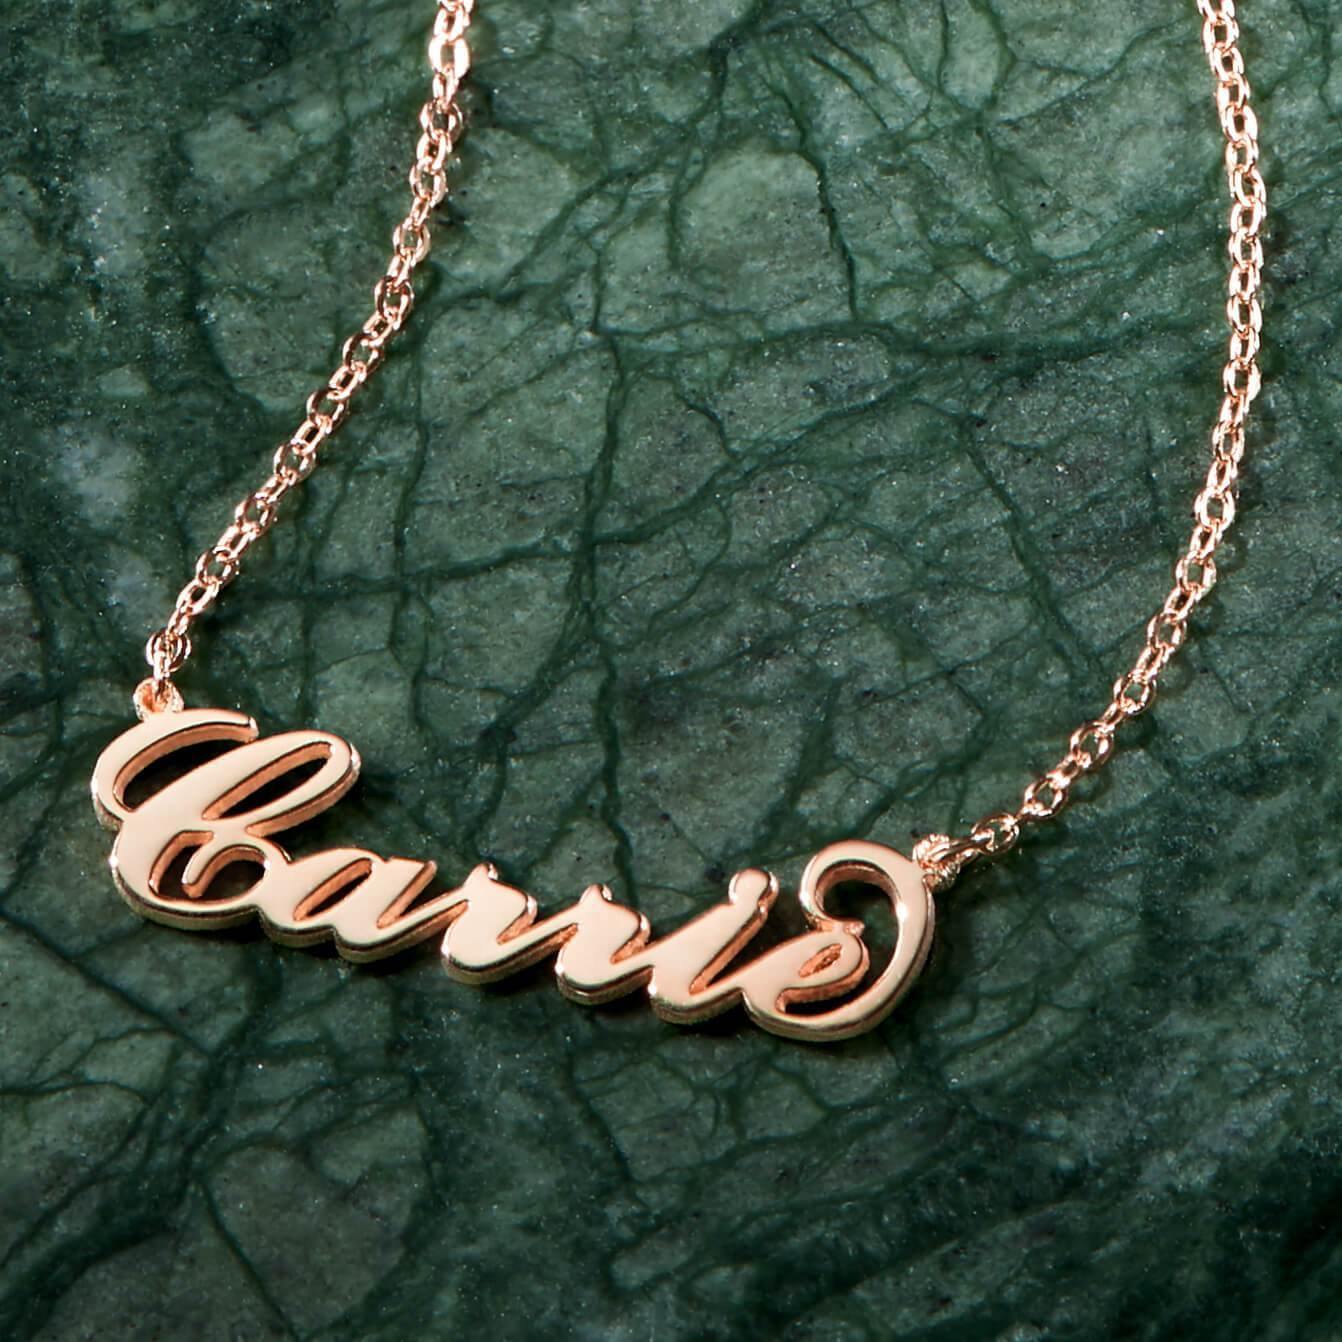 Soufeel Rose "Carrie" Style Name Necklace - soufeelus